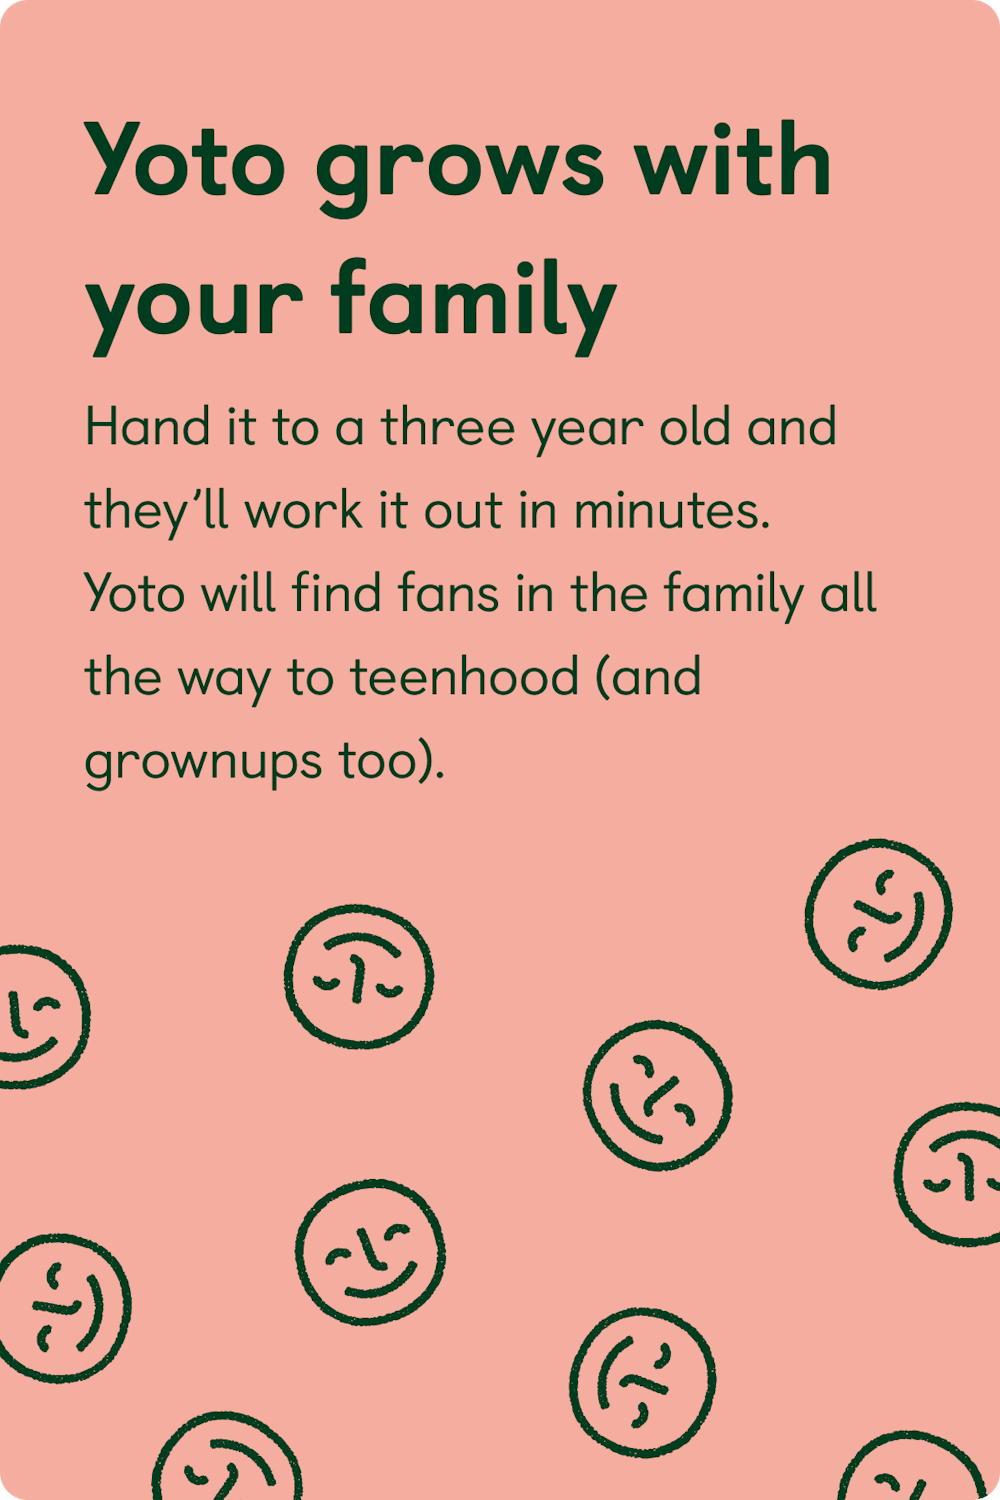 Yoto grows with your family